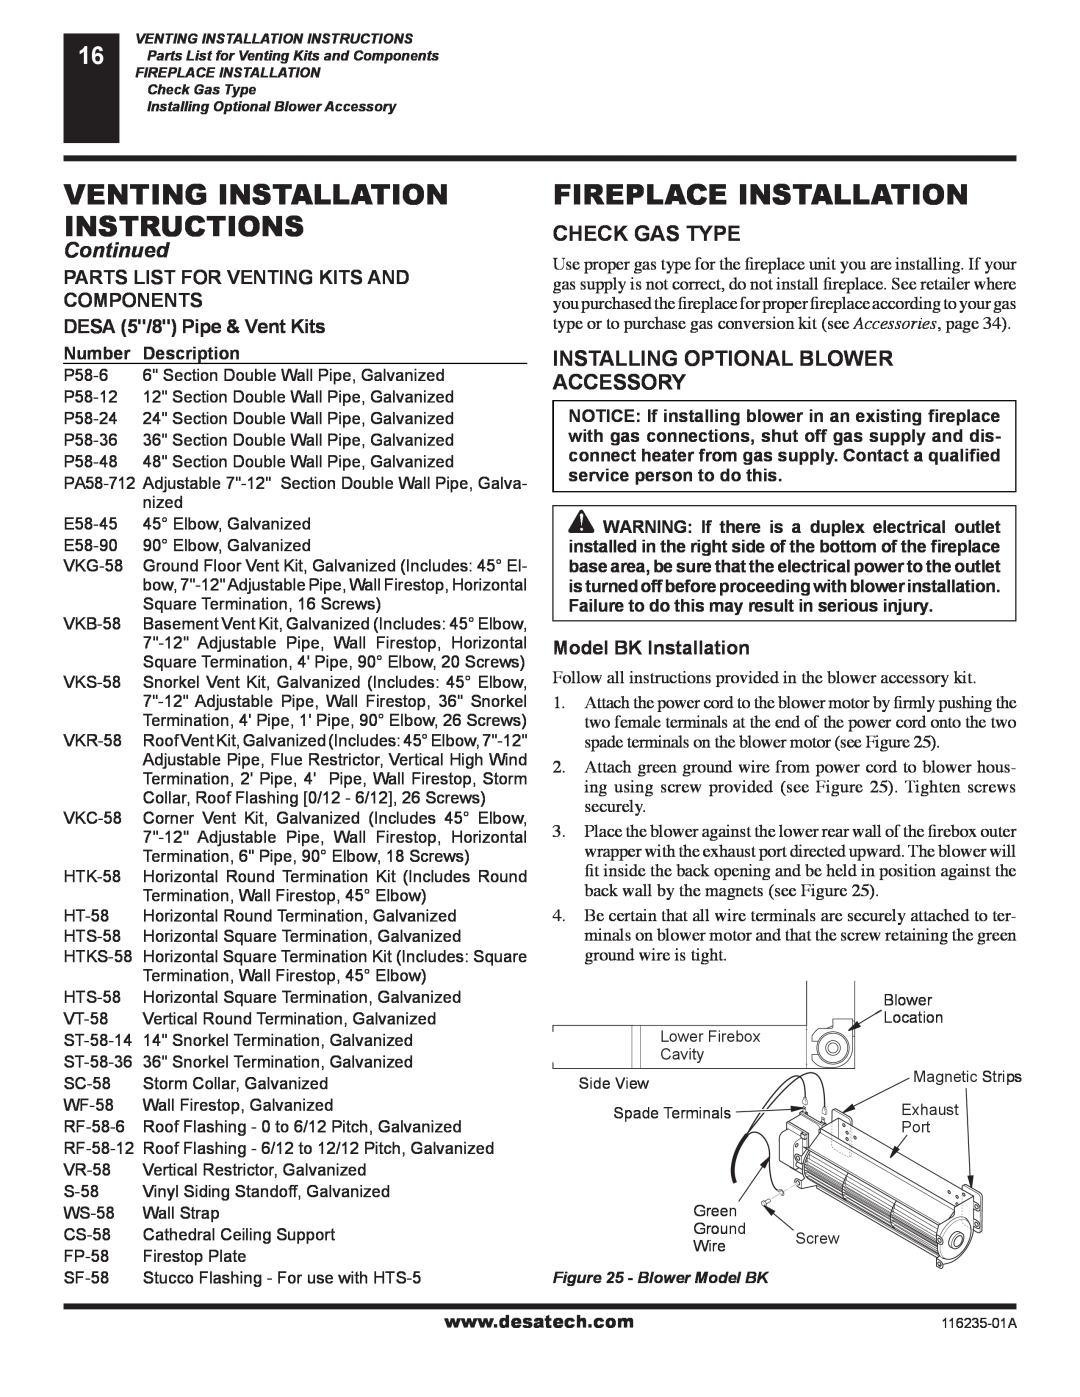 Desa (V)VC36NE Series Venting Installation, Instructions, Continued, Parts List For Venting Kits And, Components 